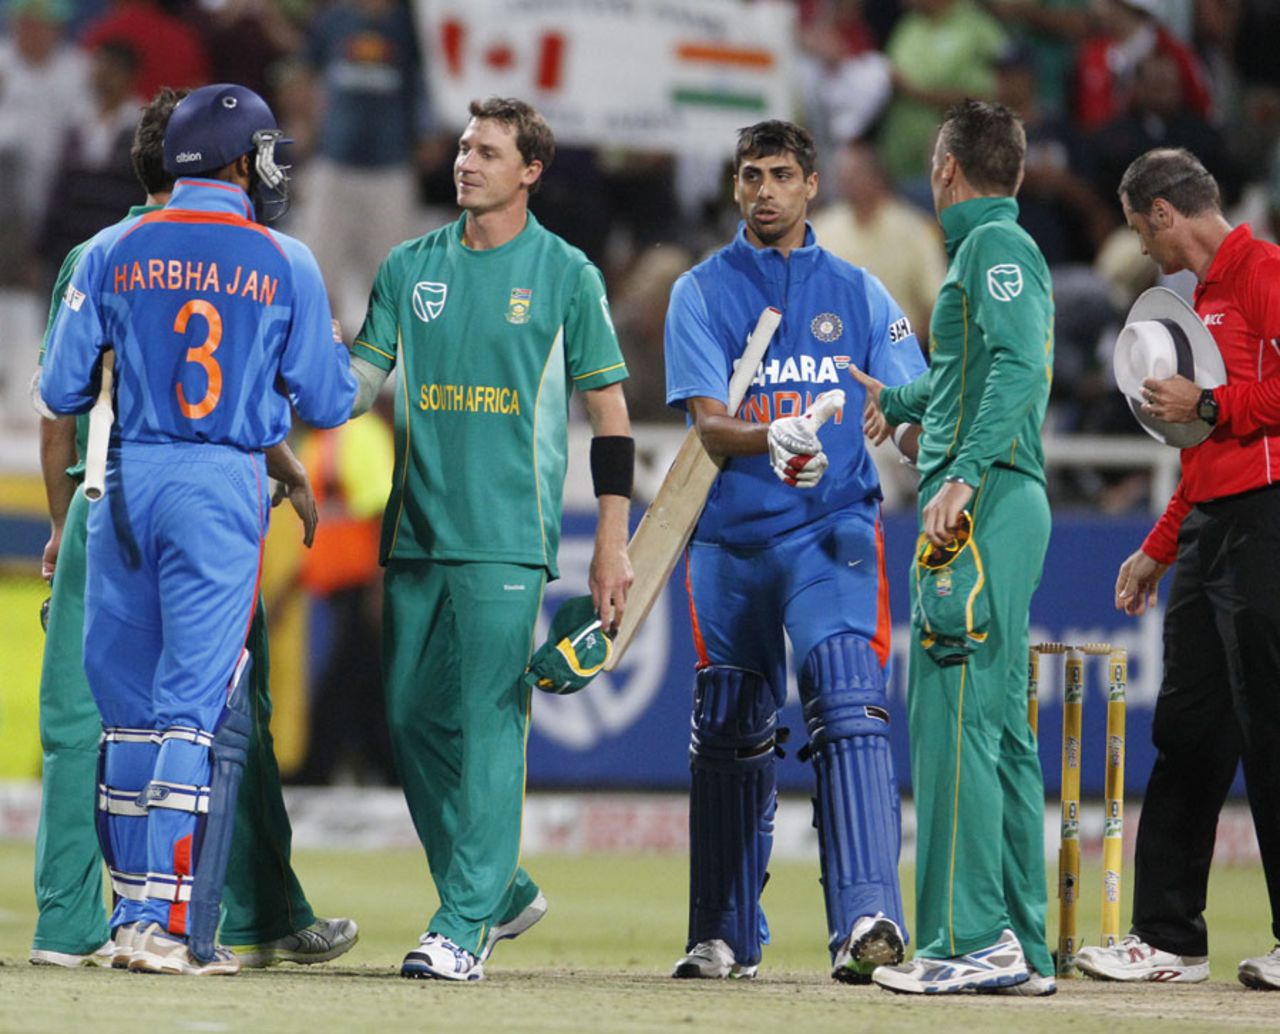 India ended up winning by two wickets with 10 balls remaining, South Africa v India, 3rd ODI, Cape Town, January 18, 2011